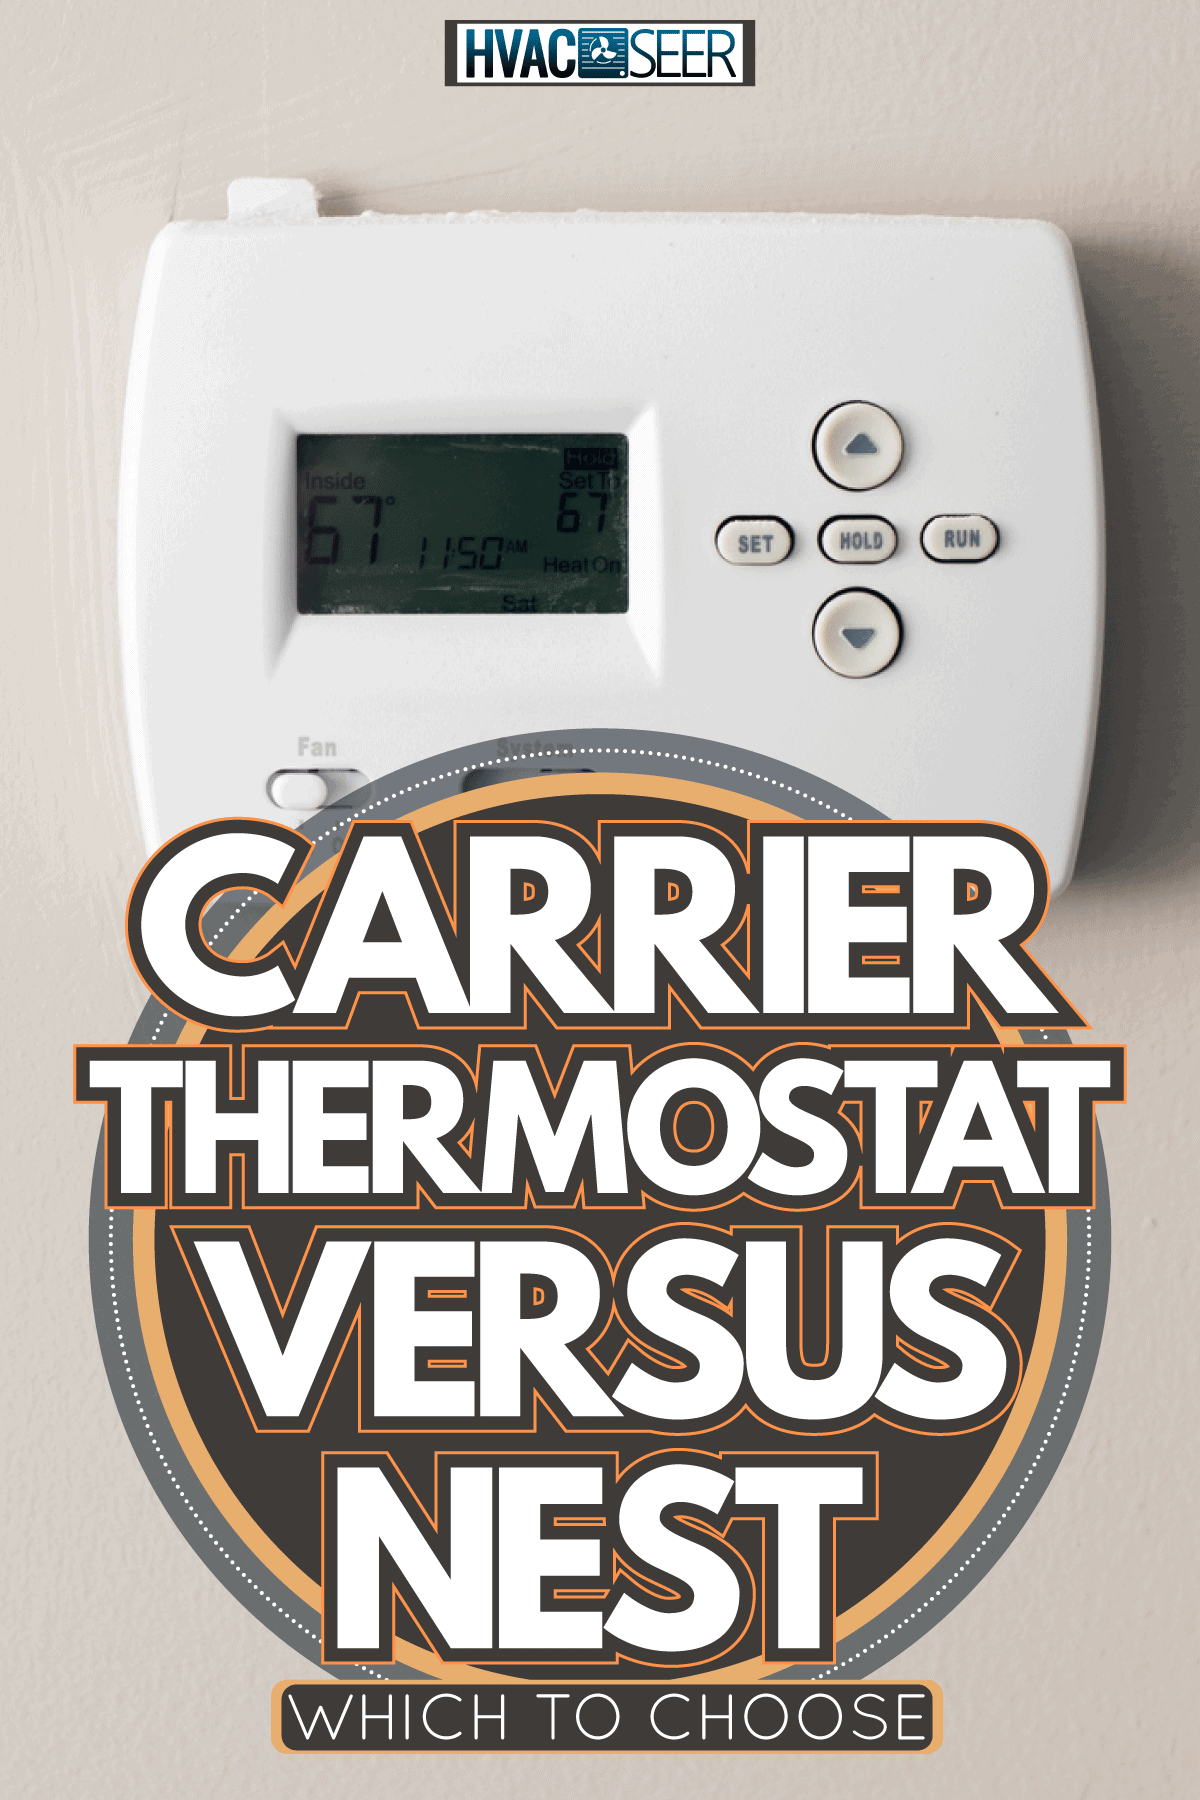 A Digital White thermostat on a wall, Carrier Thermostat Vs Nest - Which To Choose